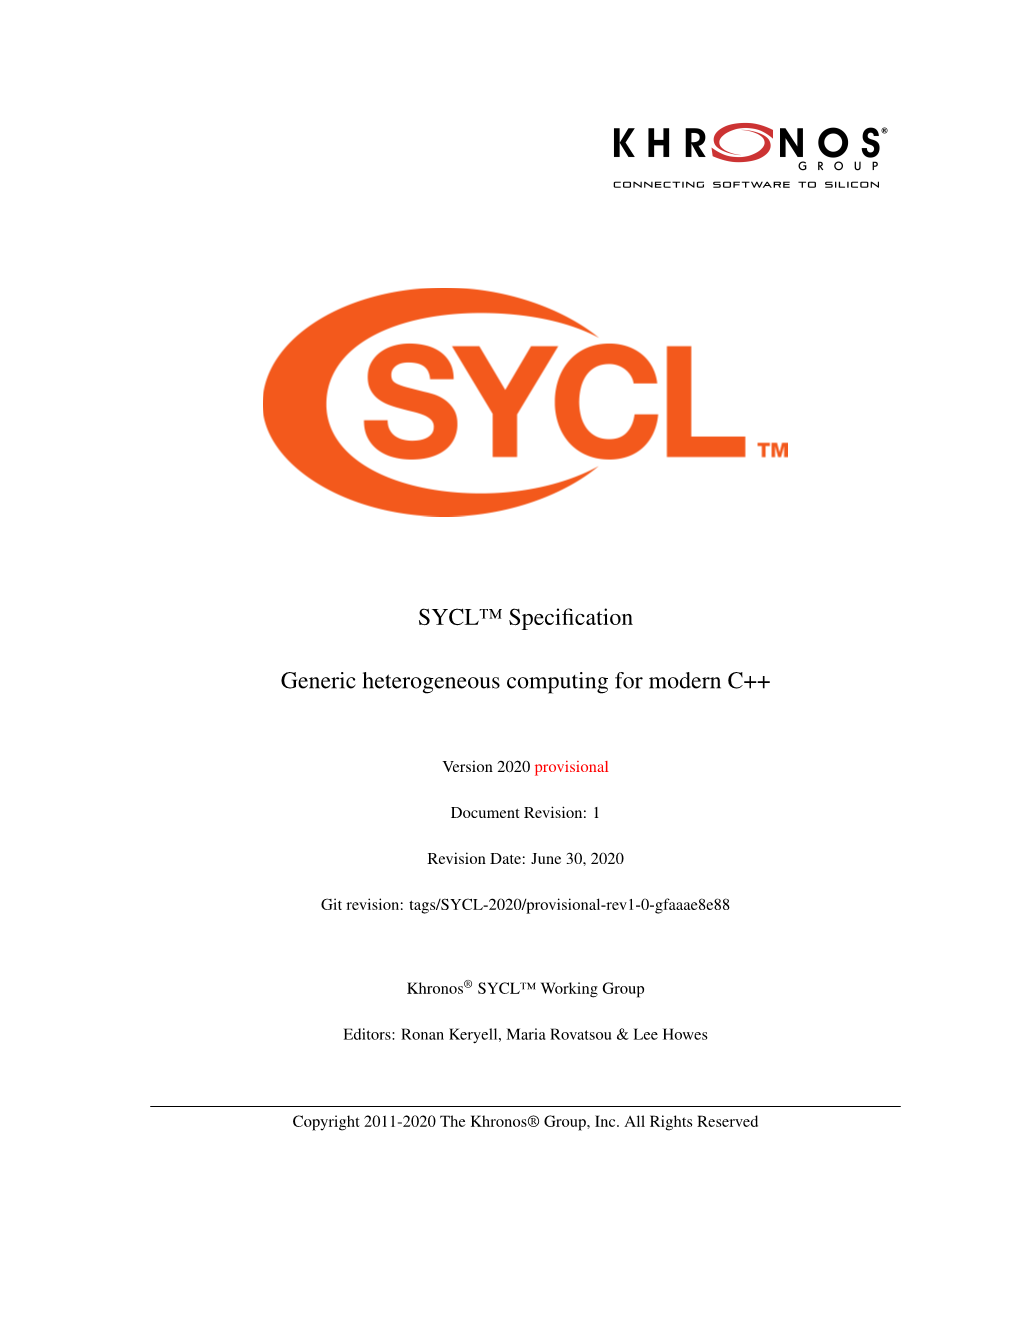 Khronos Group SYCL 2020 Provisional Specification